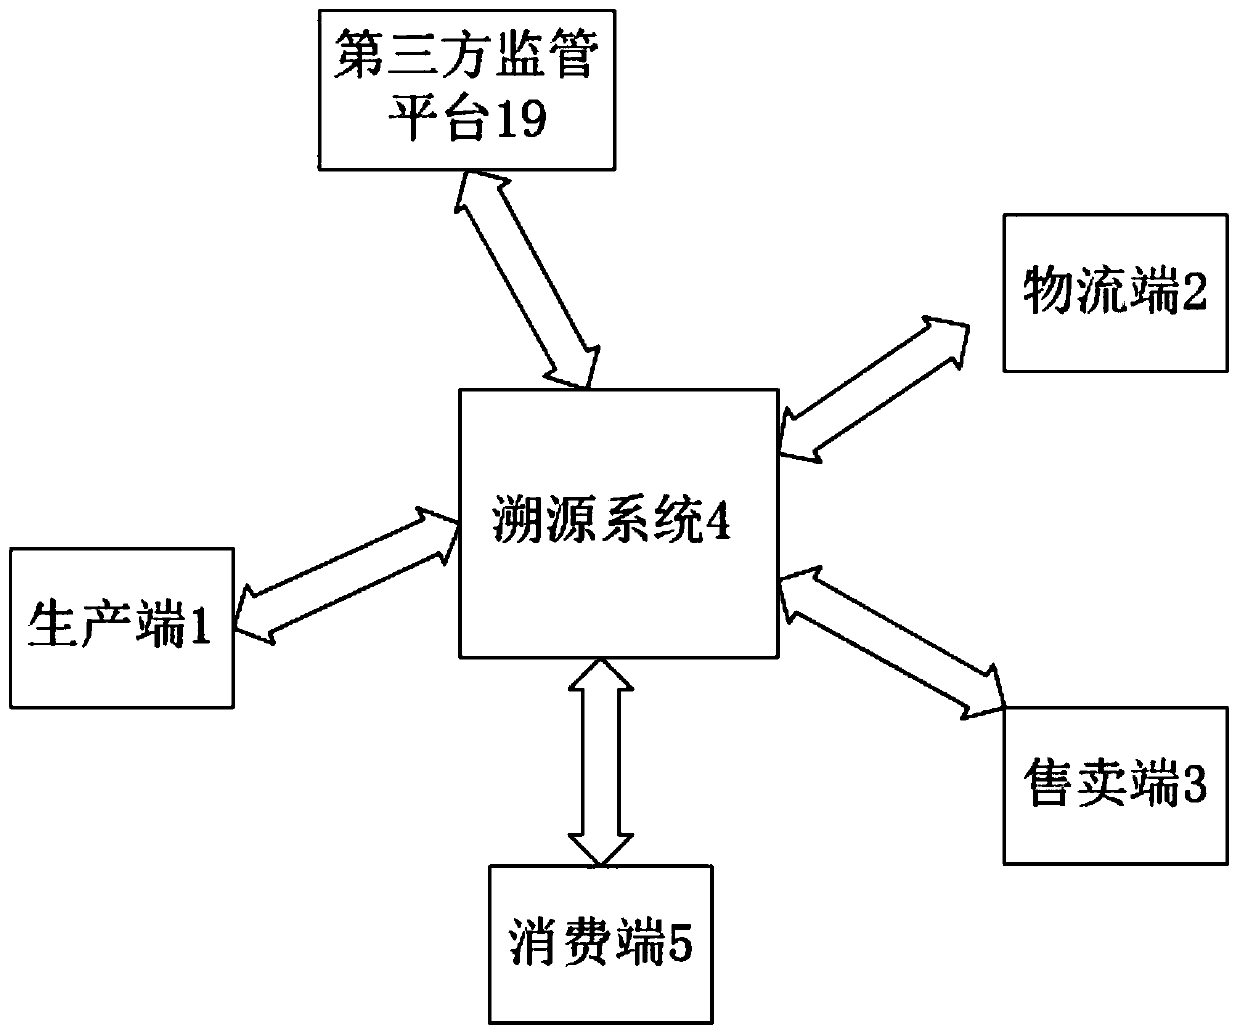 Article cold chain tracing method and system